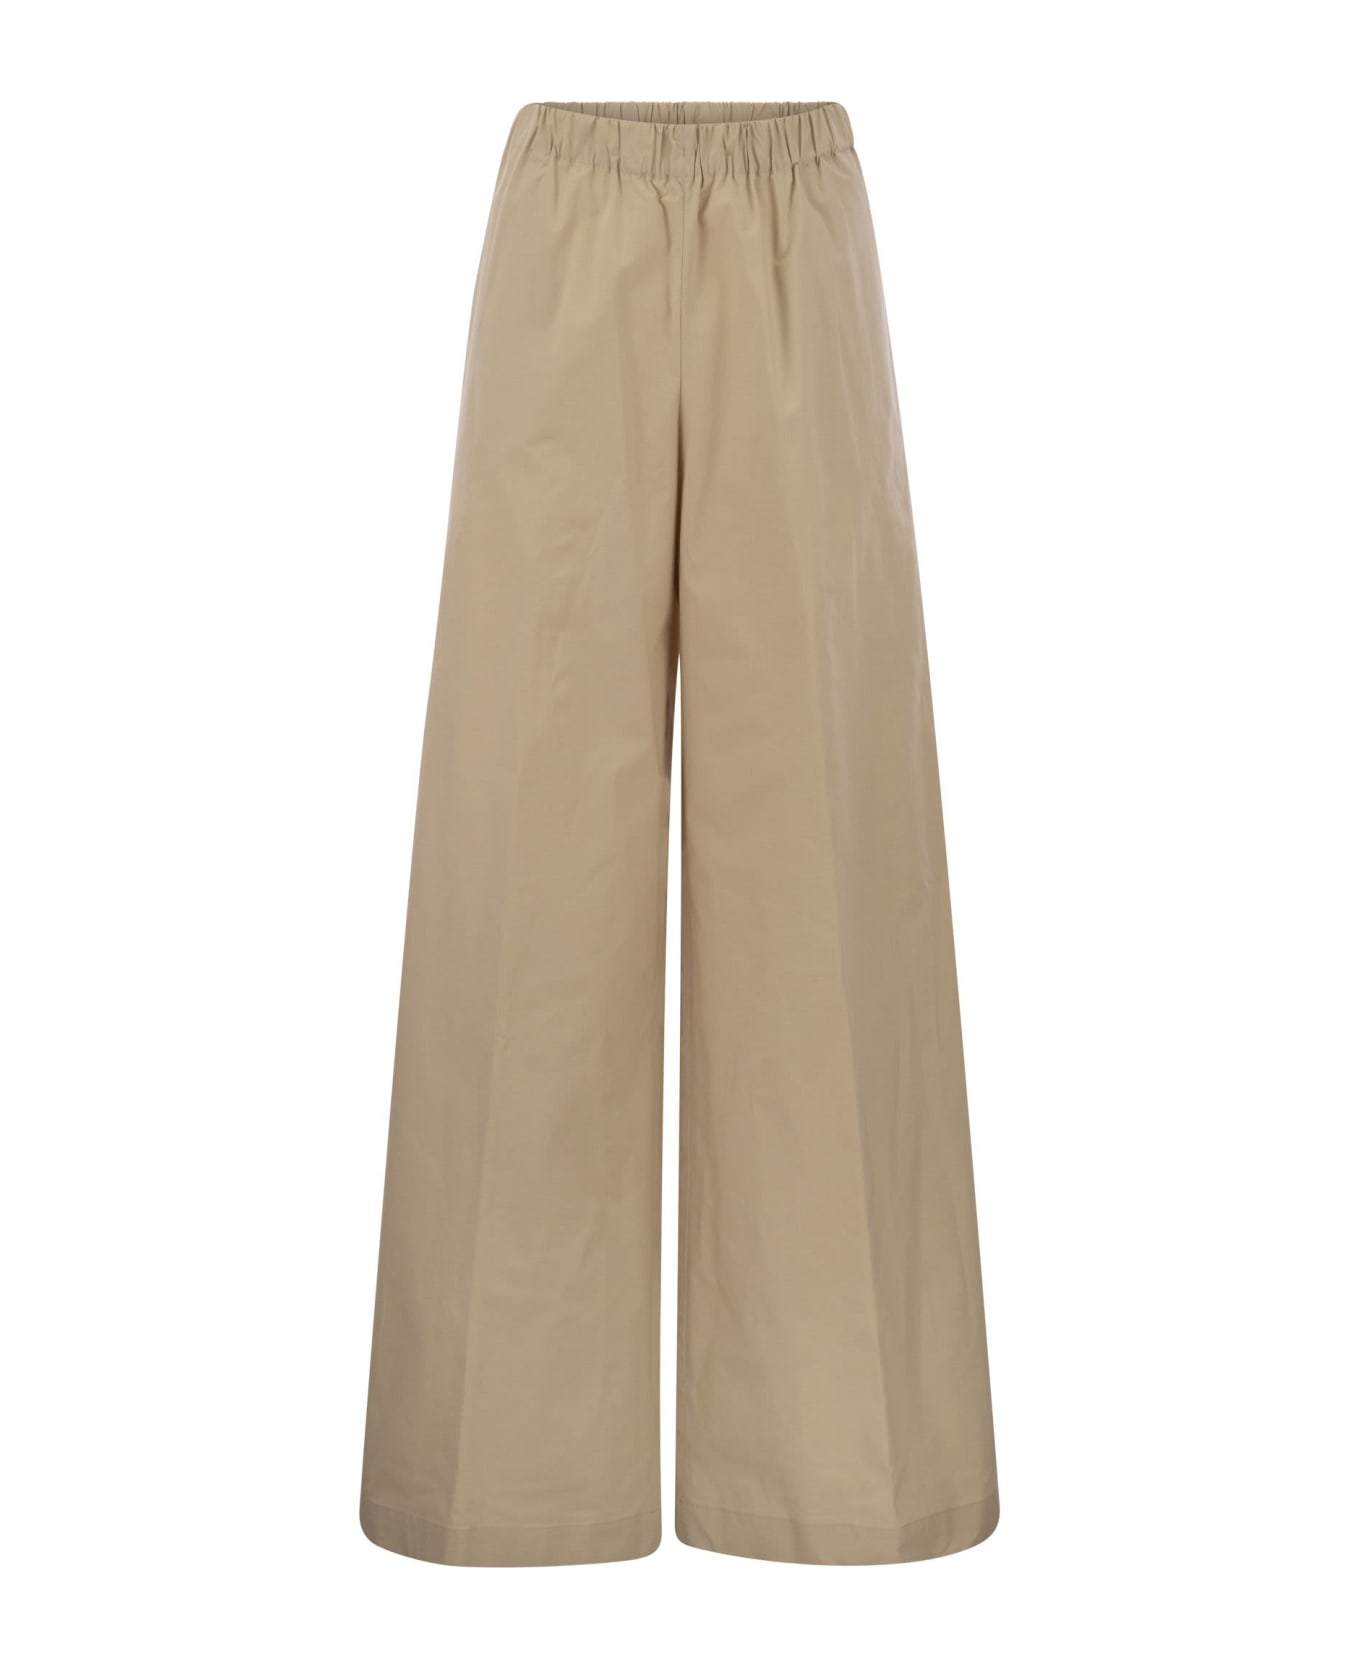 Antonelli Steven - Stretch Cotton Loose-fitting Trousers - Beige